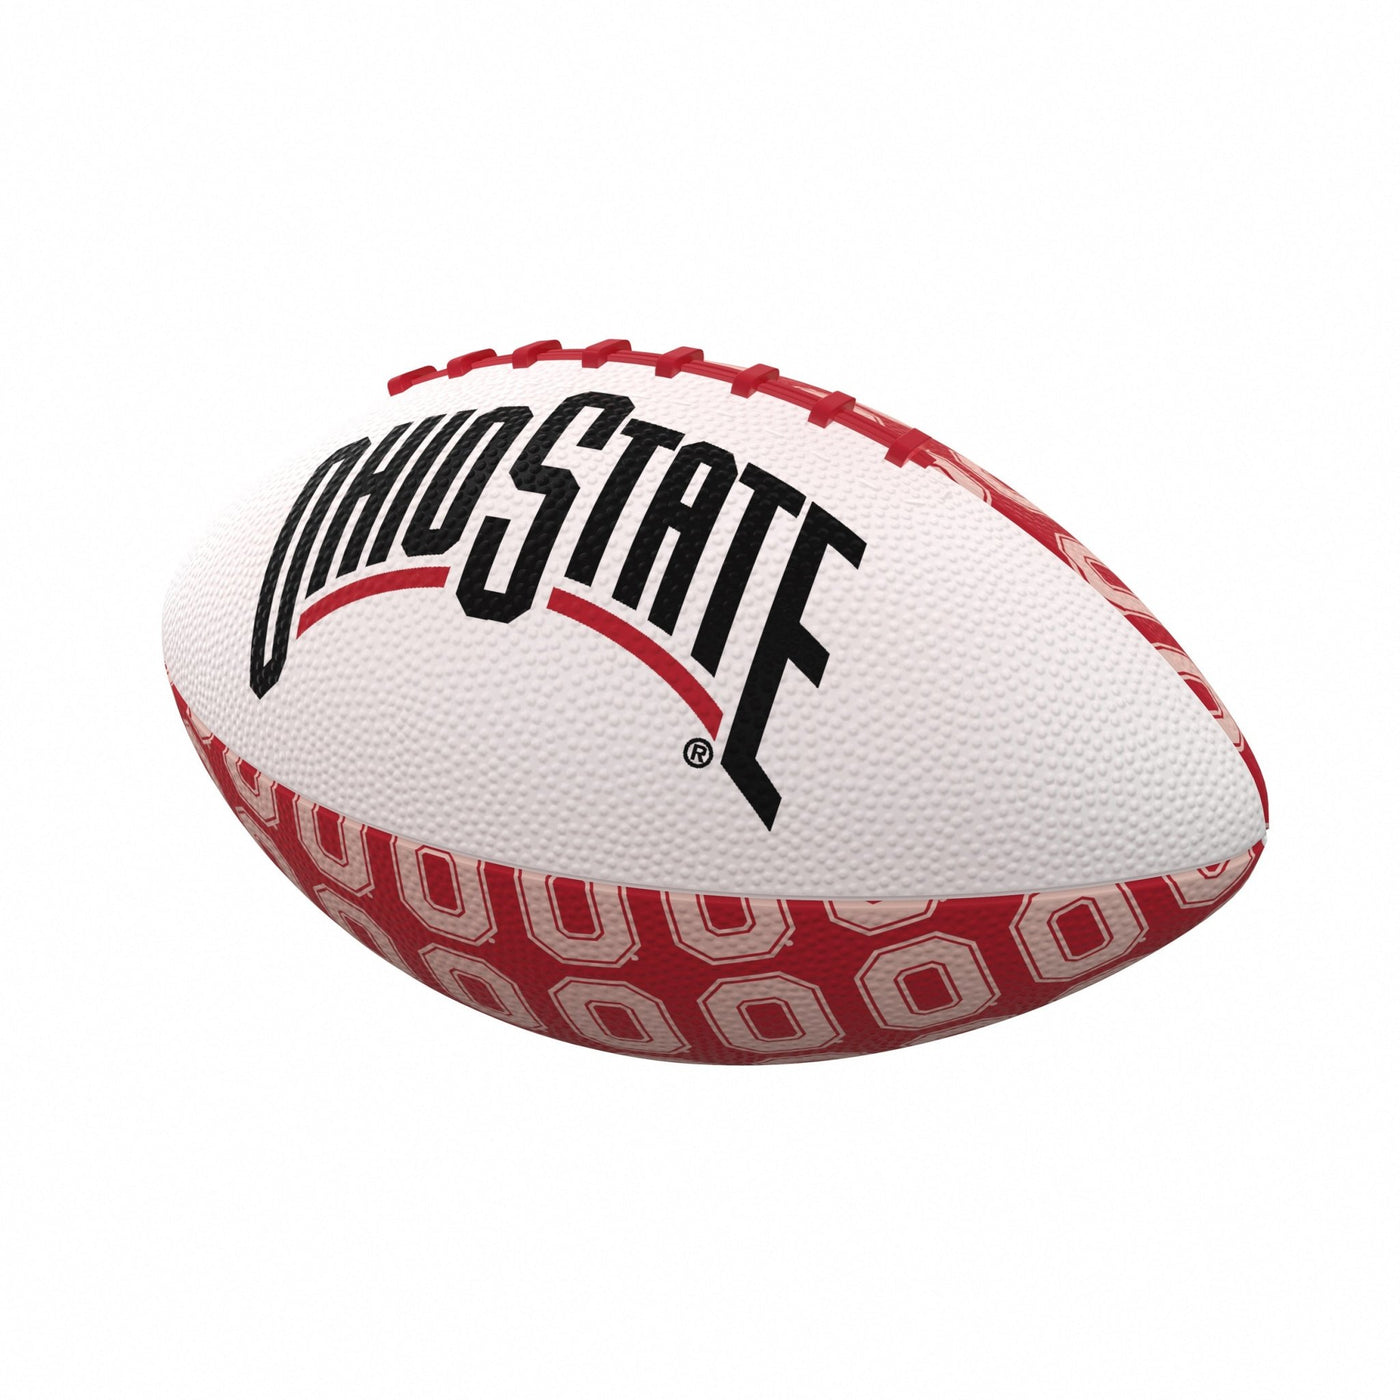 Ohio State Repeating Mini-Size Rubber Football - Logo Brands